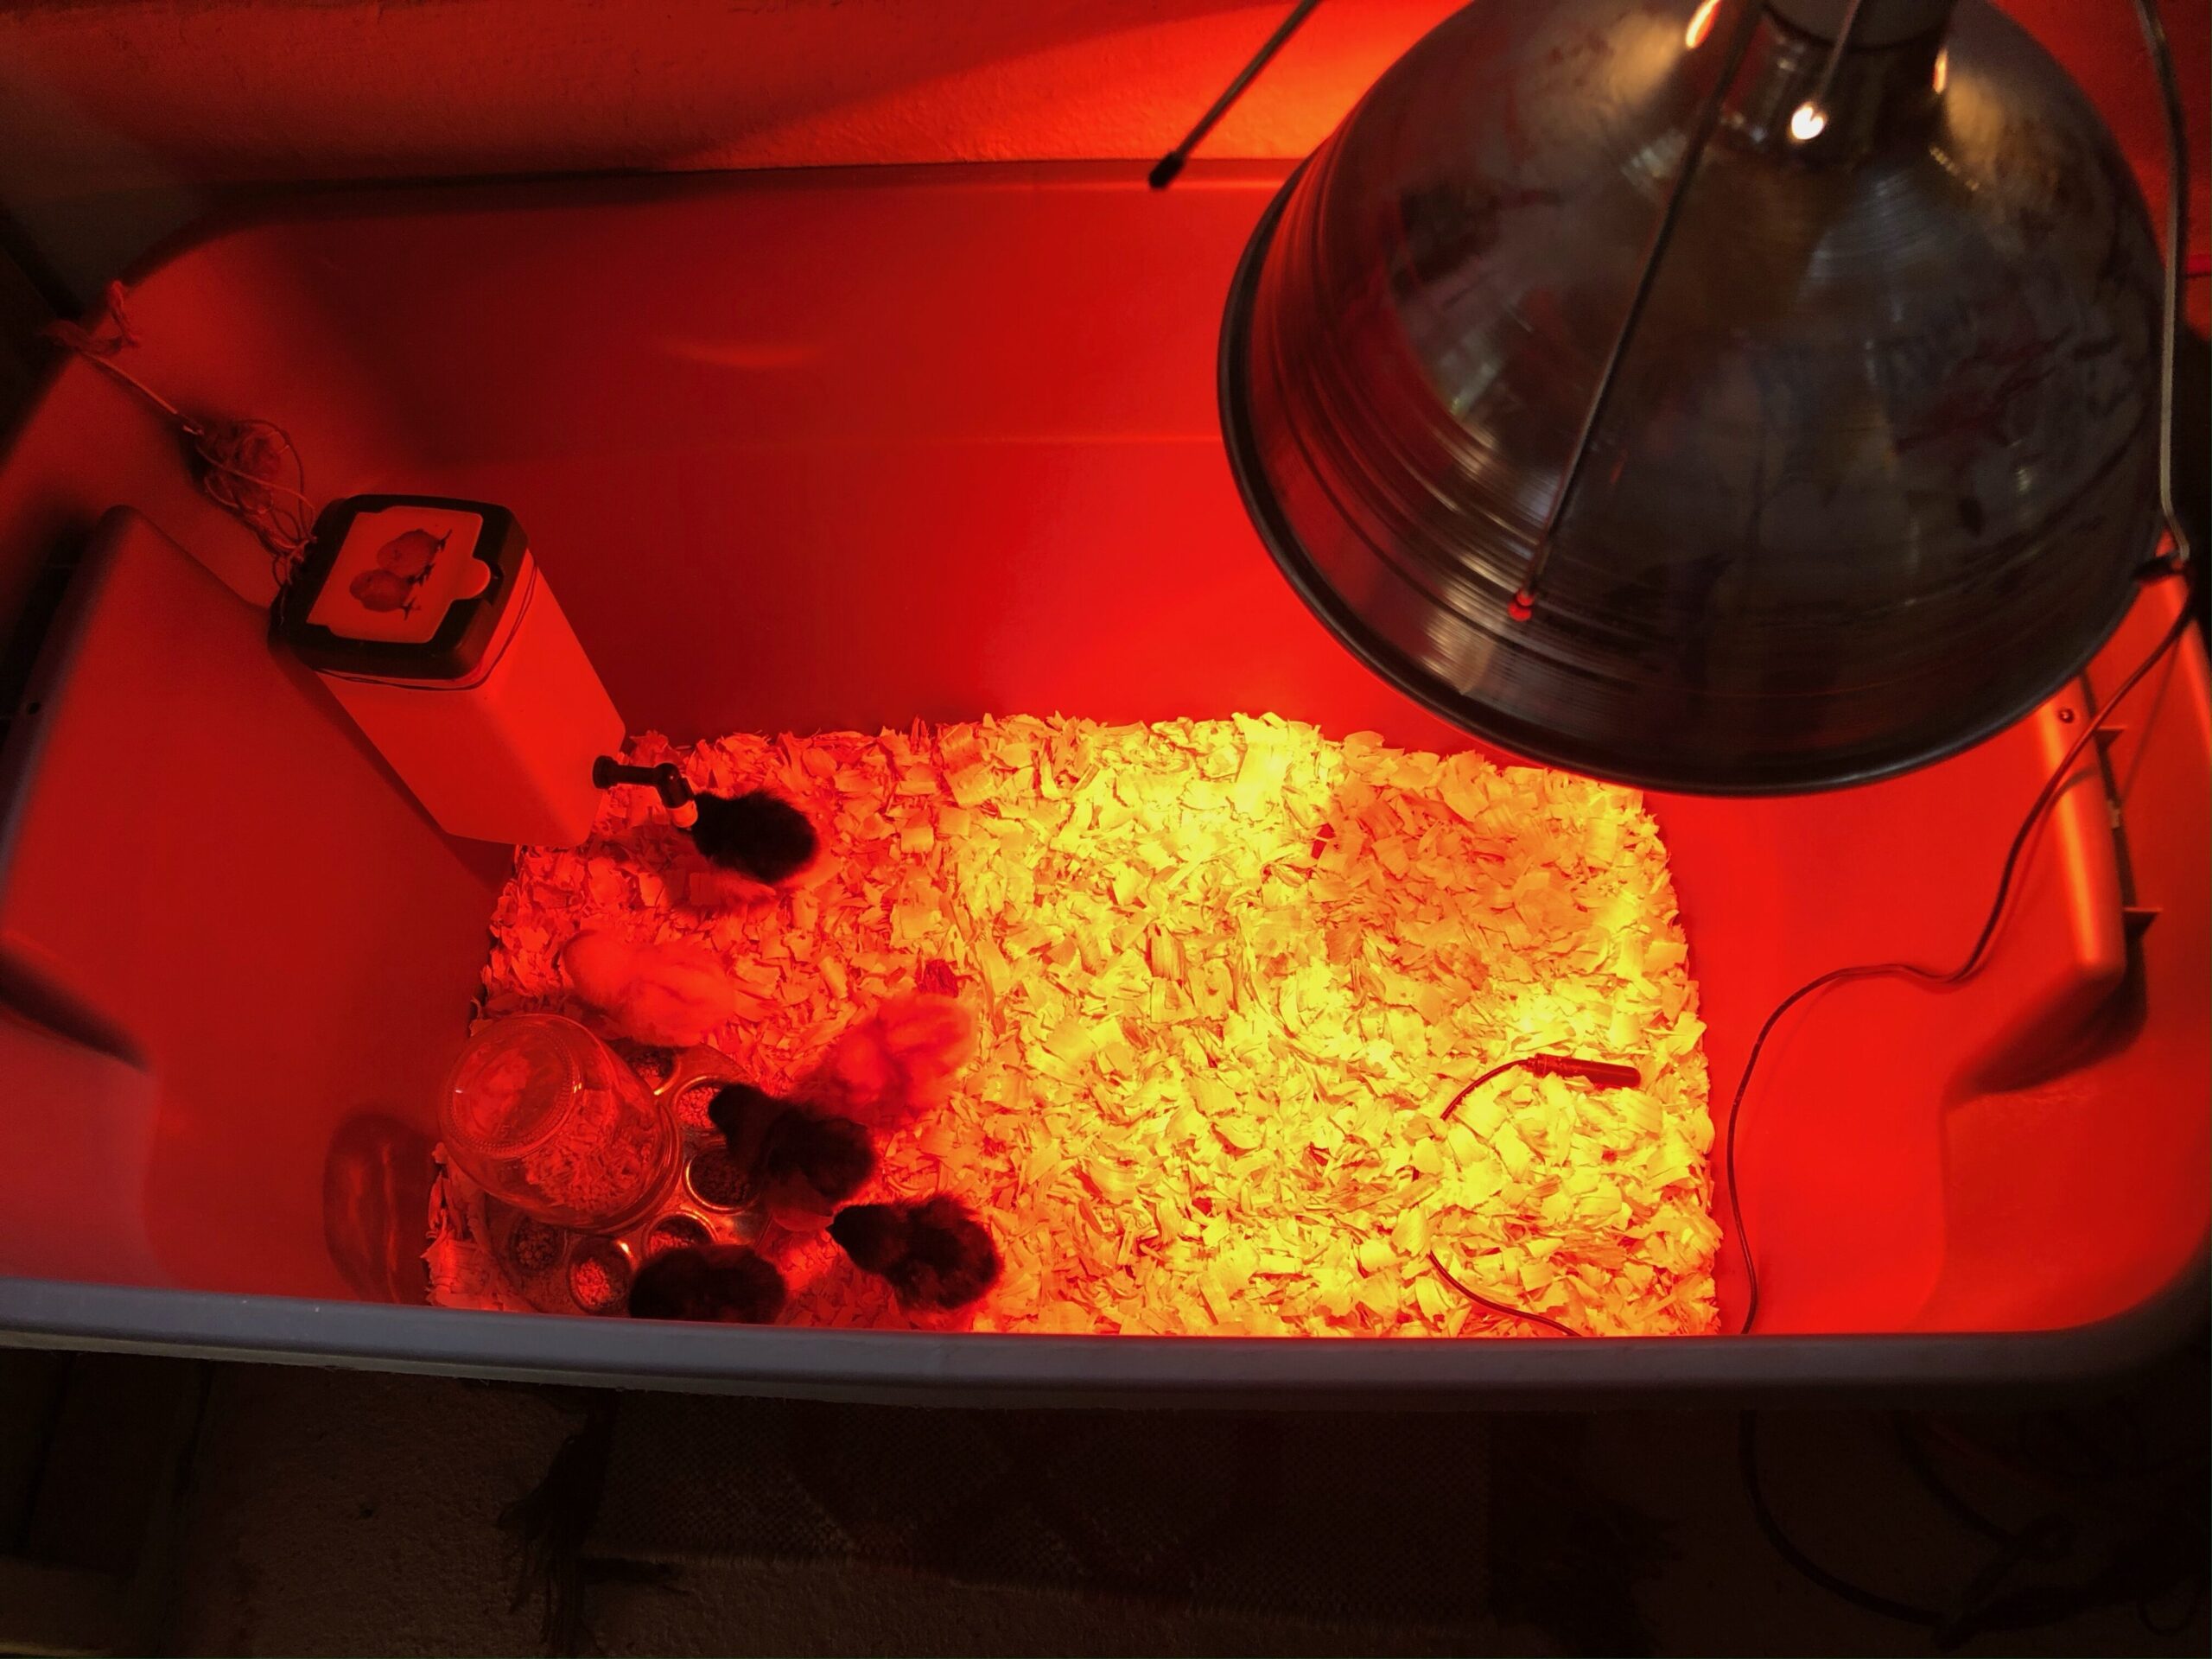 Baby chicks in brooder with heat lamp and waterer